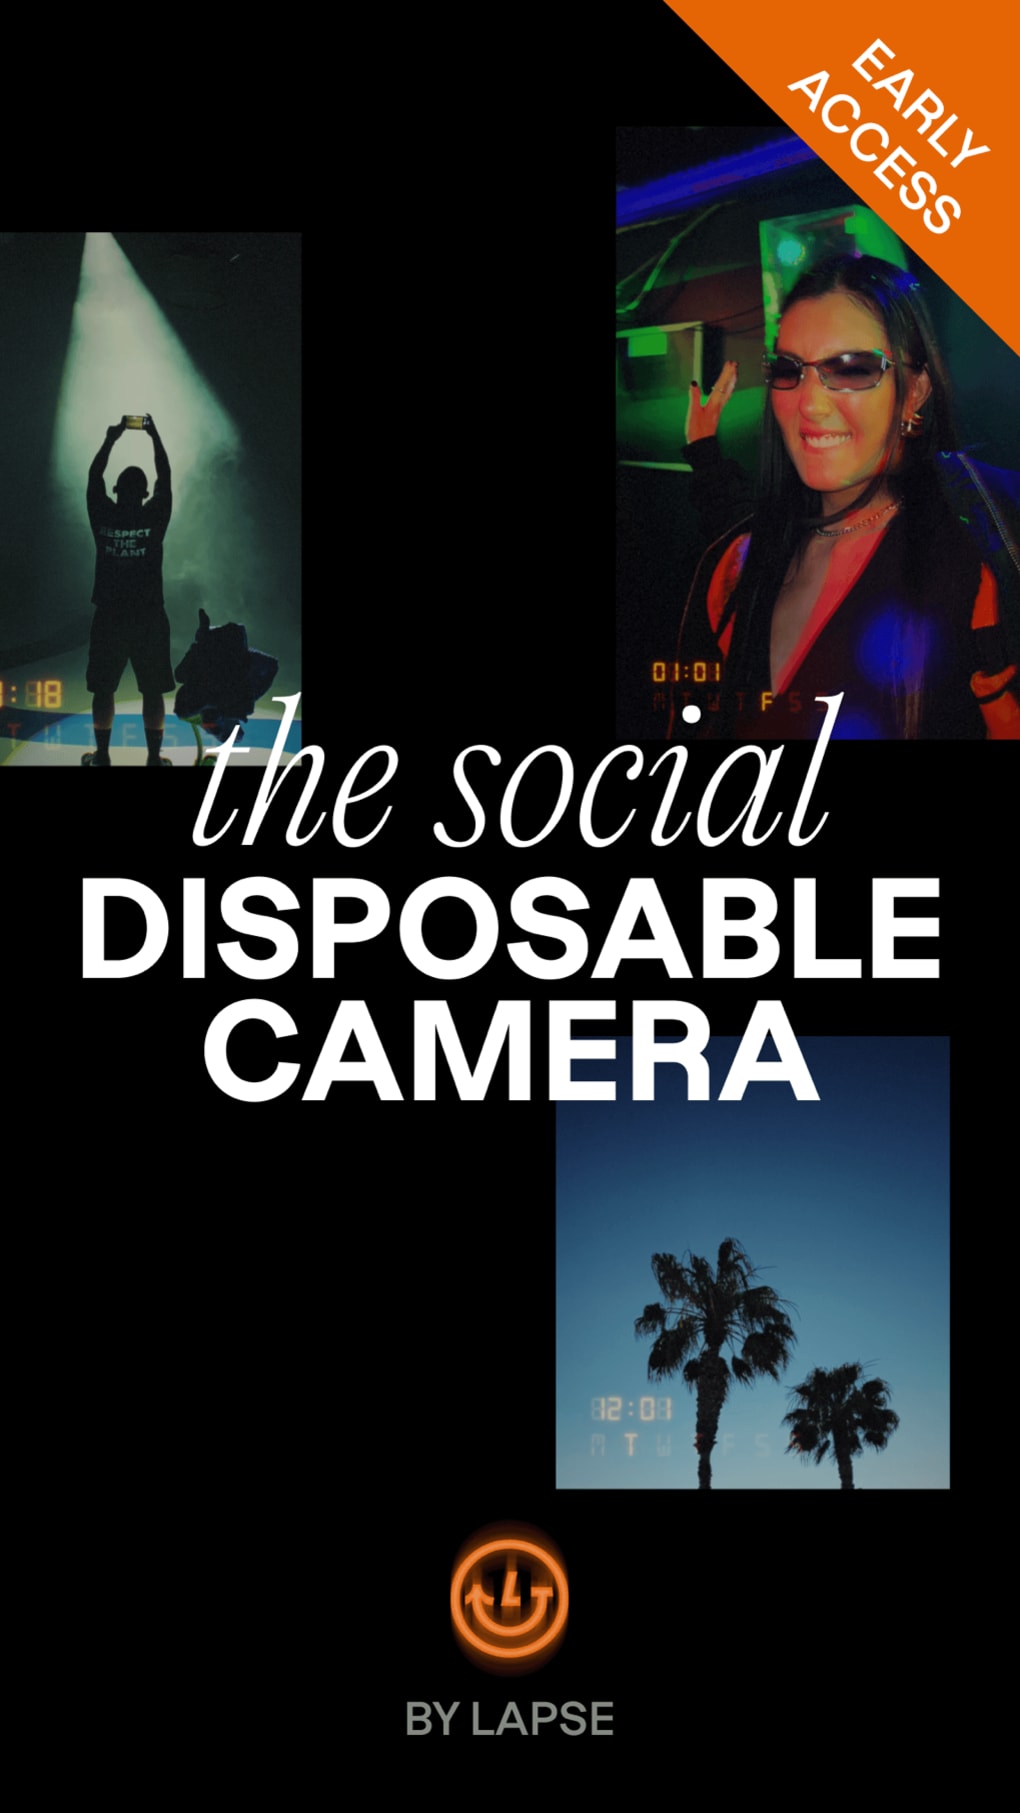 What Is Lapse? How To Use The Disposable Camera App